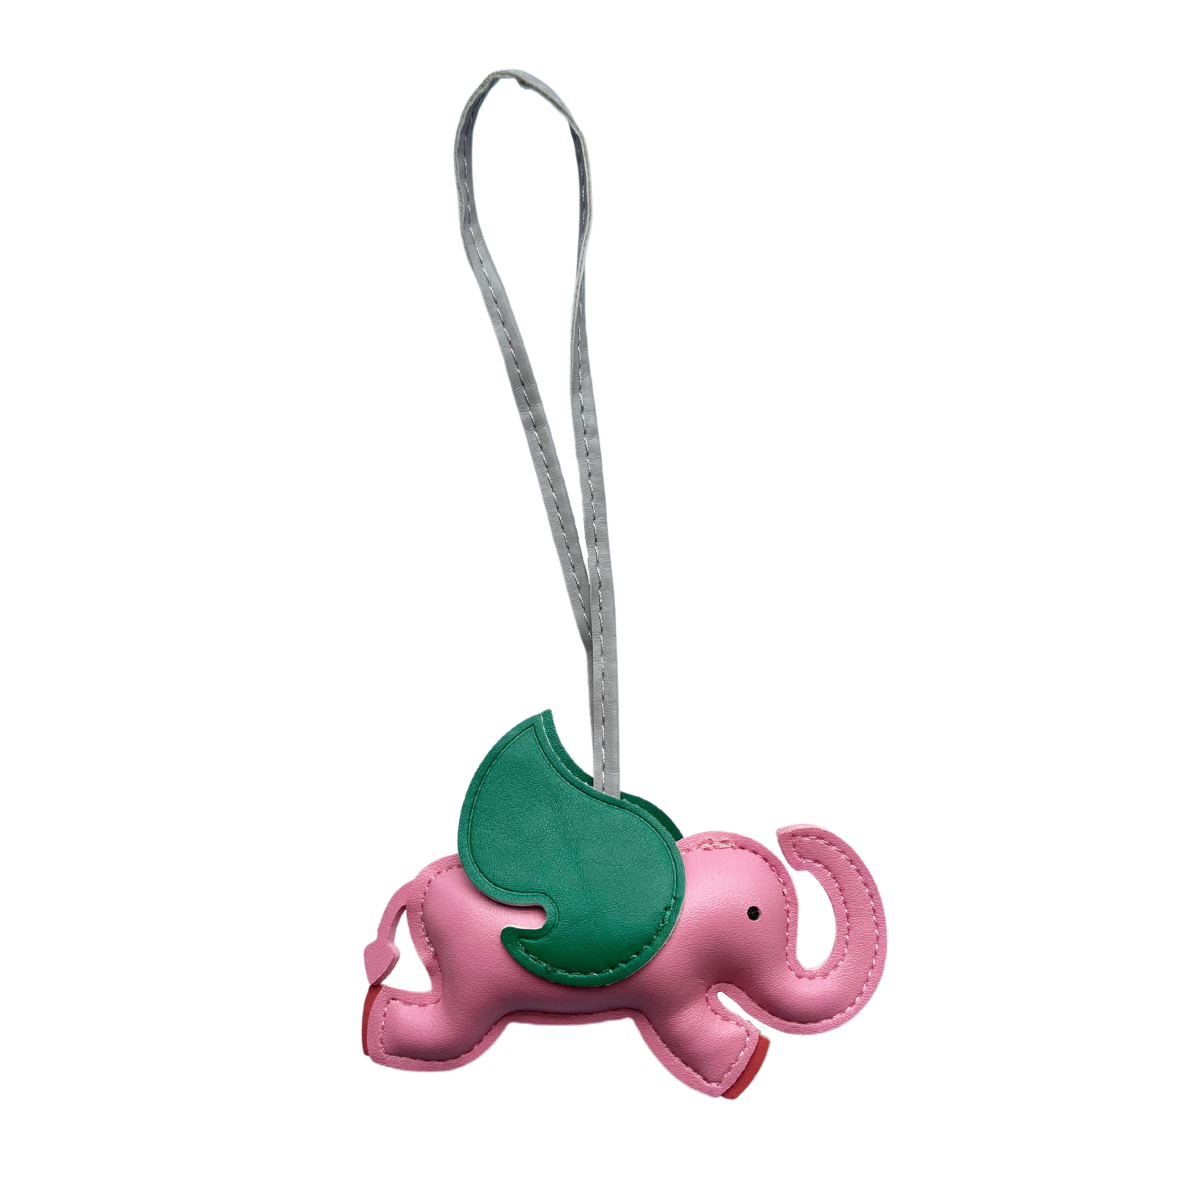 'Elefante Volante' Key Chain/ Bag Charm in Pink and Green